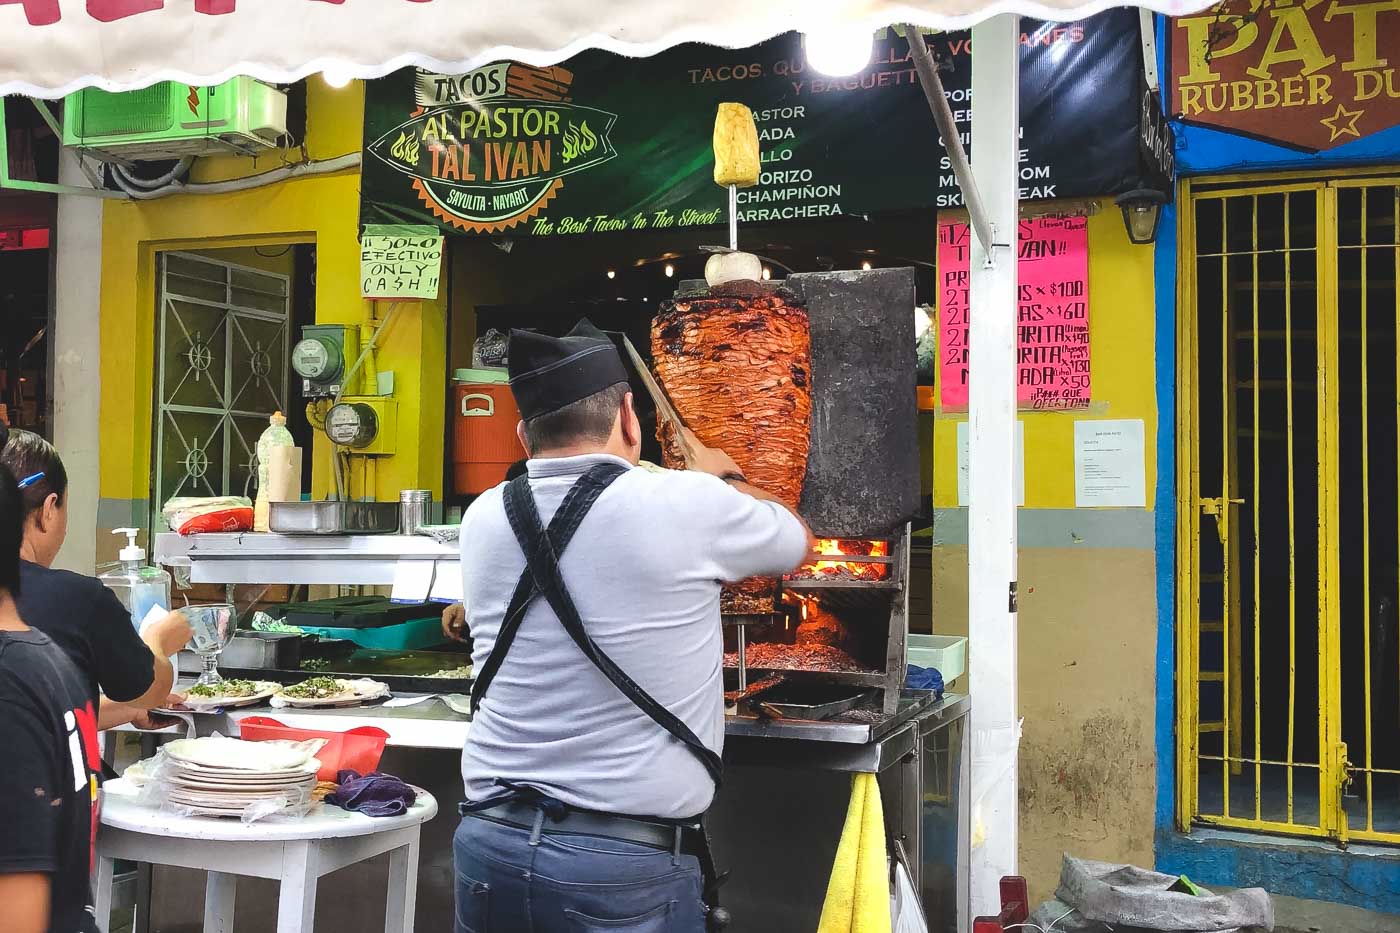 A rotisserie of Al Pastor meat being shaved with a machete by the cook at Tal Ivan restaurant at the main square of Sayulita.